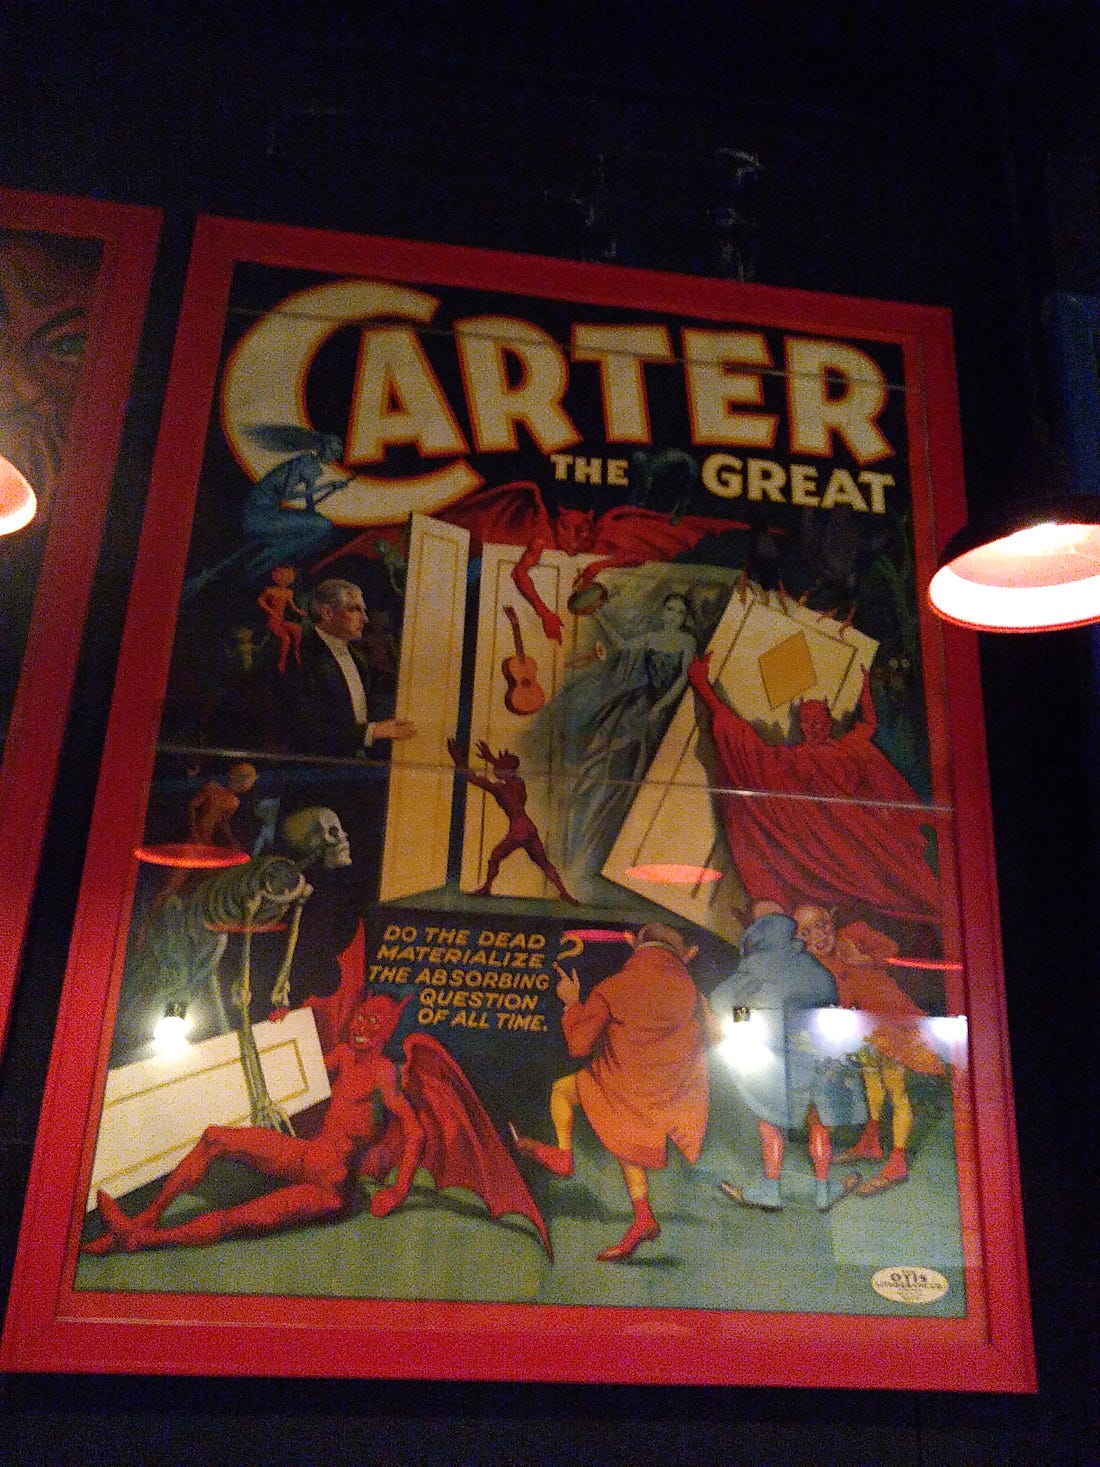 Huge poster for Carter the Great a magician